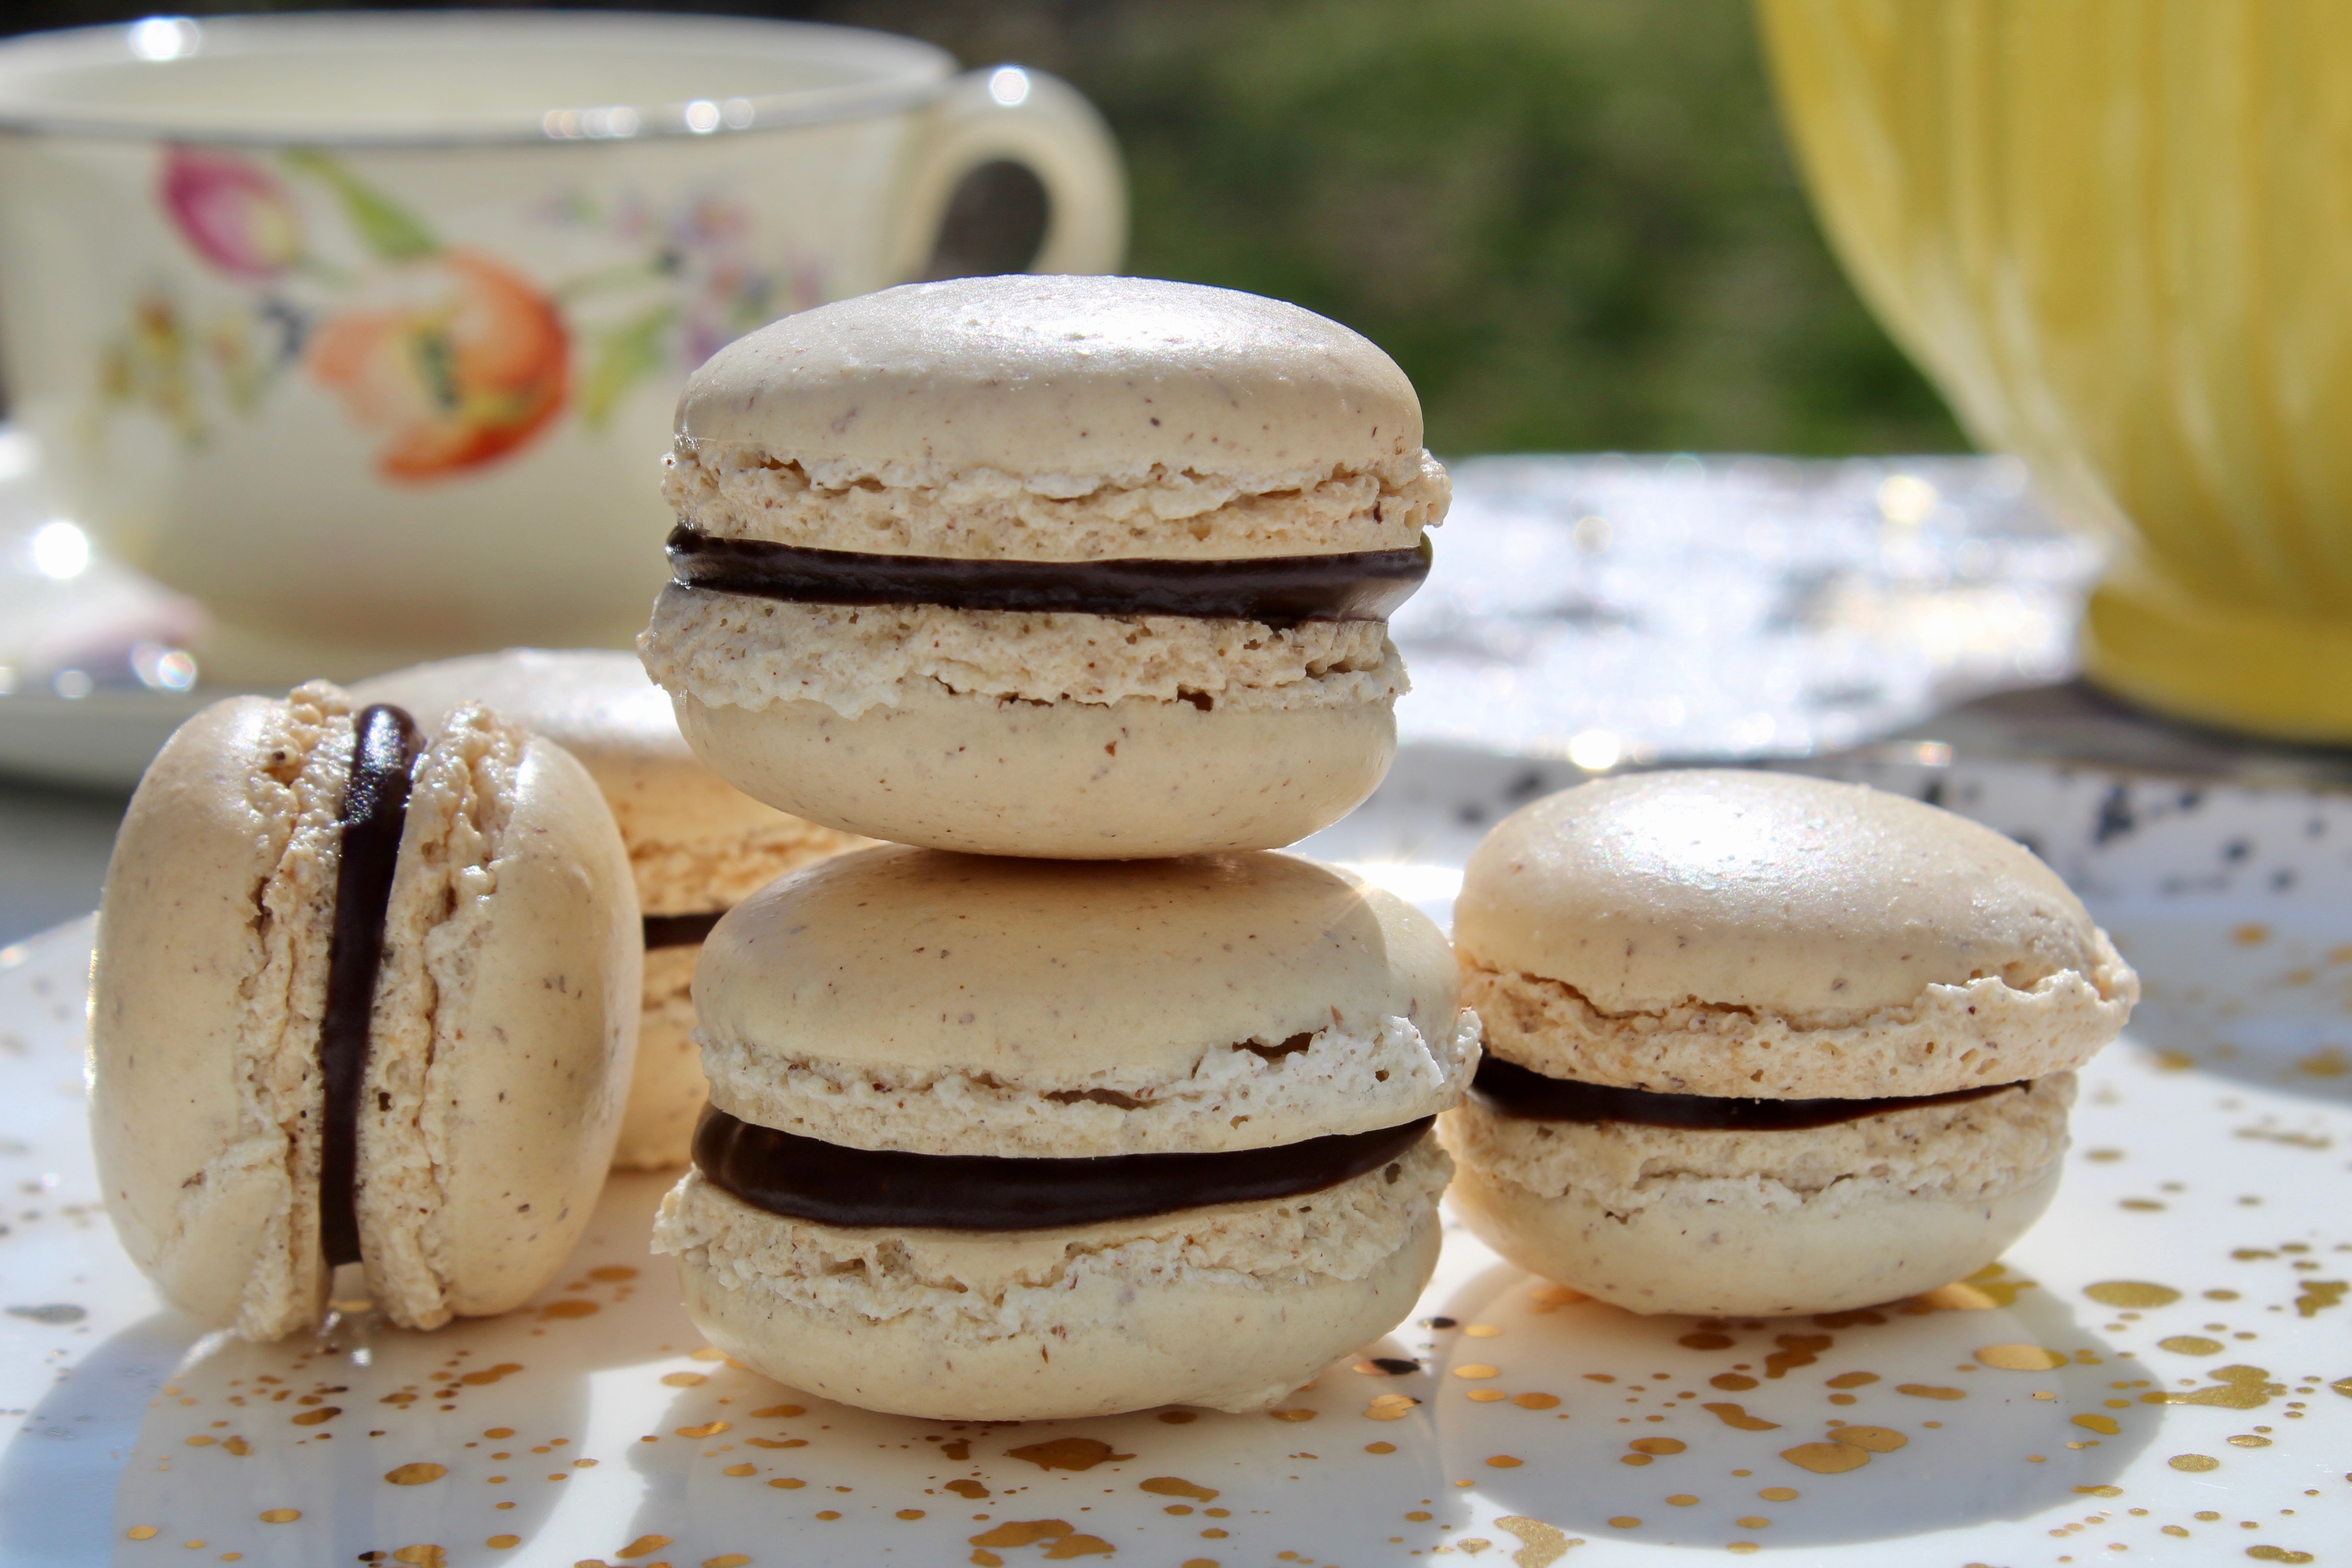 Hazelnut Macarons with Nutella Ganache filling are even more delicious than the are impressive!